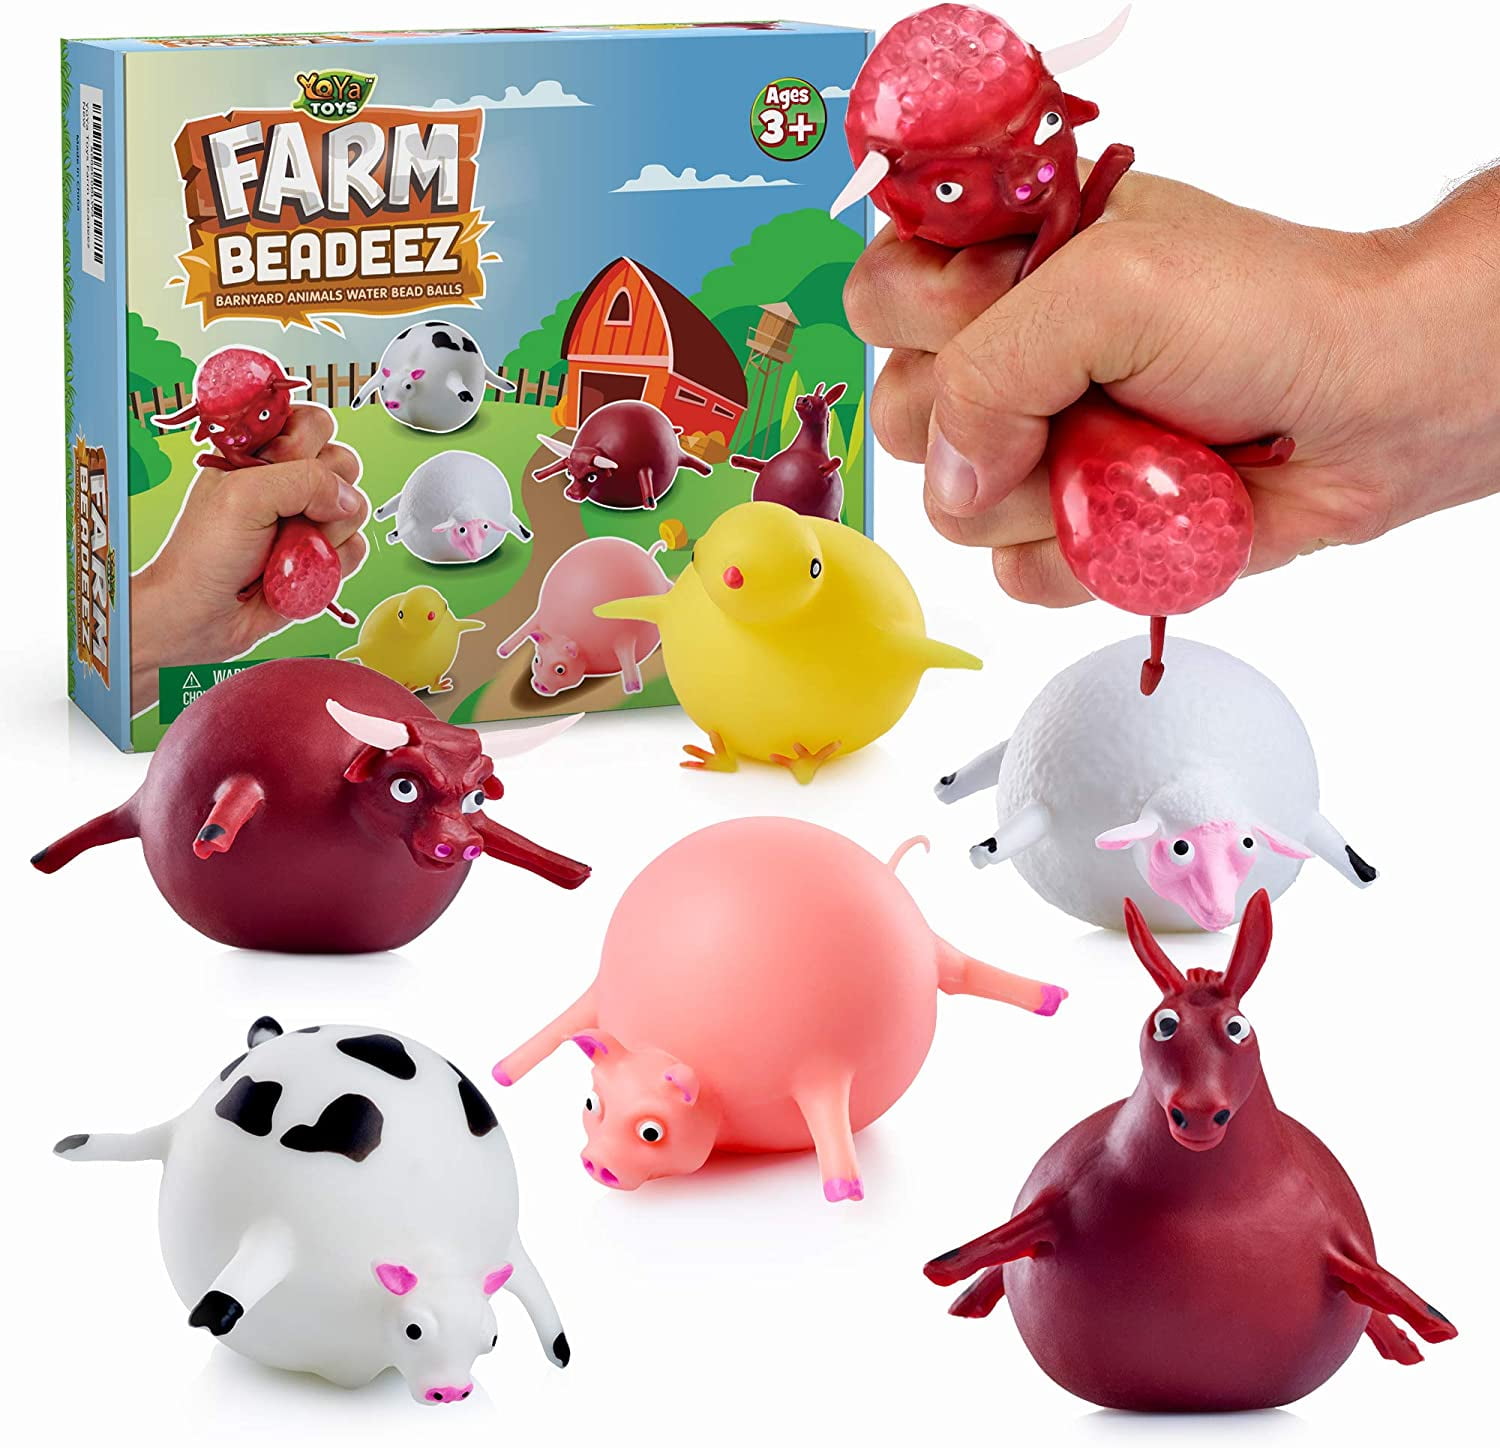 Fidget Sensory Toys for Autistic Children Farm Animal Shaped Stress Relief Toys Anxiety Farm Beadeez Fun Party Favors 6 Pack Stress Balls for Kids and Adults with Squishy Water Beads ADHD 